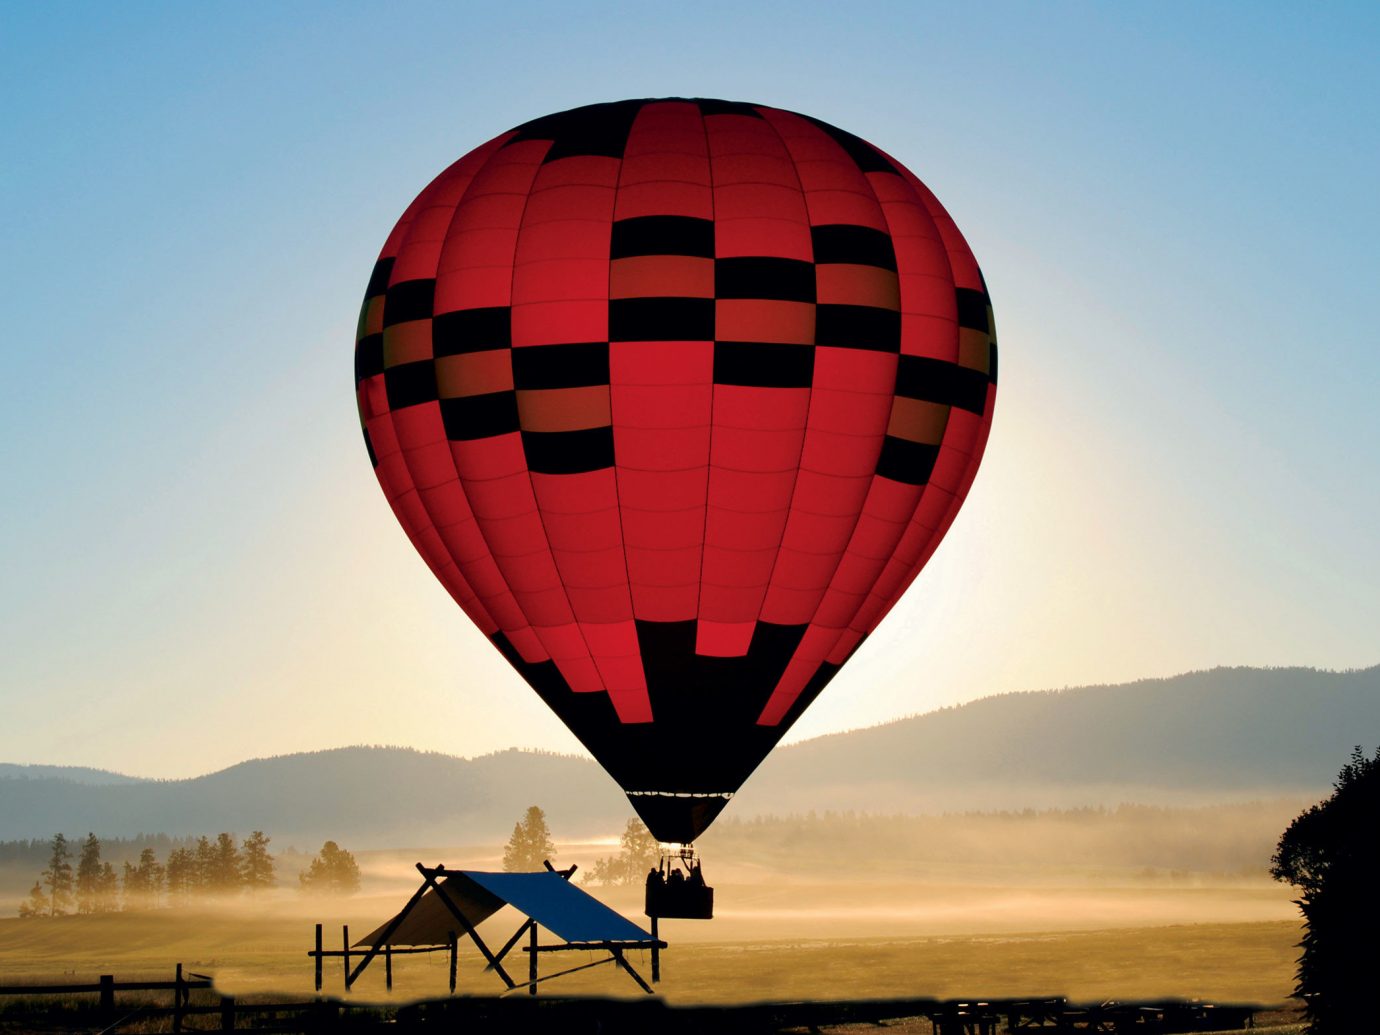 Glamping Luxury Travel Outdoors + Adventure aircraft balloon transport sky outdoor hot air ballooning Hot Air Balloon vehicle atmosphere of earth toy